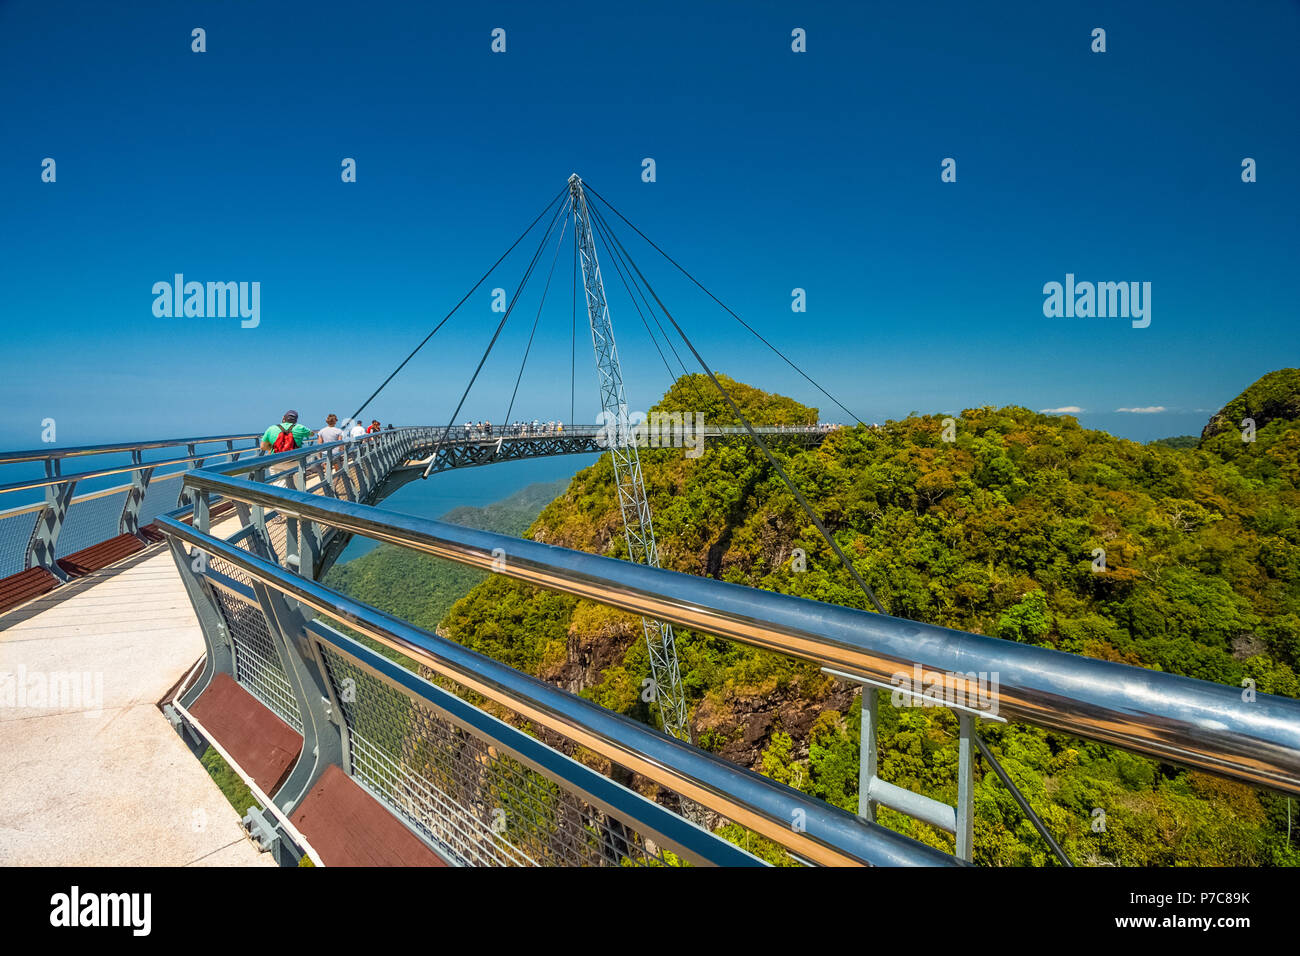 Tourists walking on the Langkawi Sky Bridge, a curved pedestrian cable-stayed bridge, suspended by cables from a single pylon, at the peak of... Stock Photo